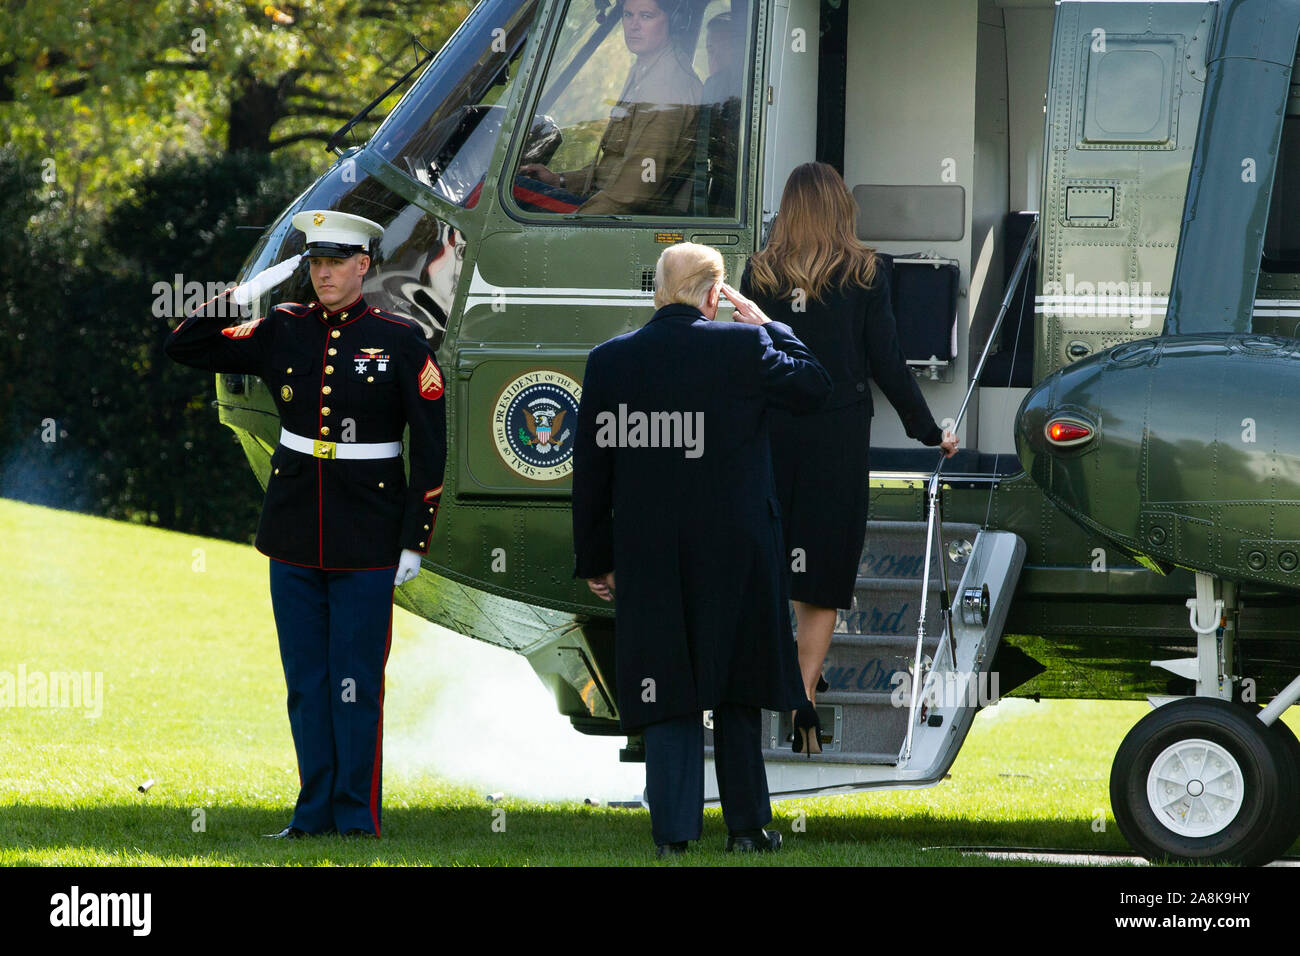 Washington DC, USA. 09th Nov, 2019. US President Donald J. Trump (Bottom R) and First Lady Melania Trump (Back R) board Marine One on the South Lawn of the White House, in Washington, DC, USA, 09 November 2019. The President and First Lady will attend a National Collegiate Athletic Association (NCAA) football game between Alabama and Louisiana State University in Tuscaloosa, Alabama; then they will stay in New York City through Veterans Day. Credit: MediaPunch Inc/Alamy Live News Stock Photo